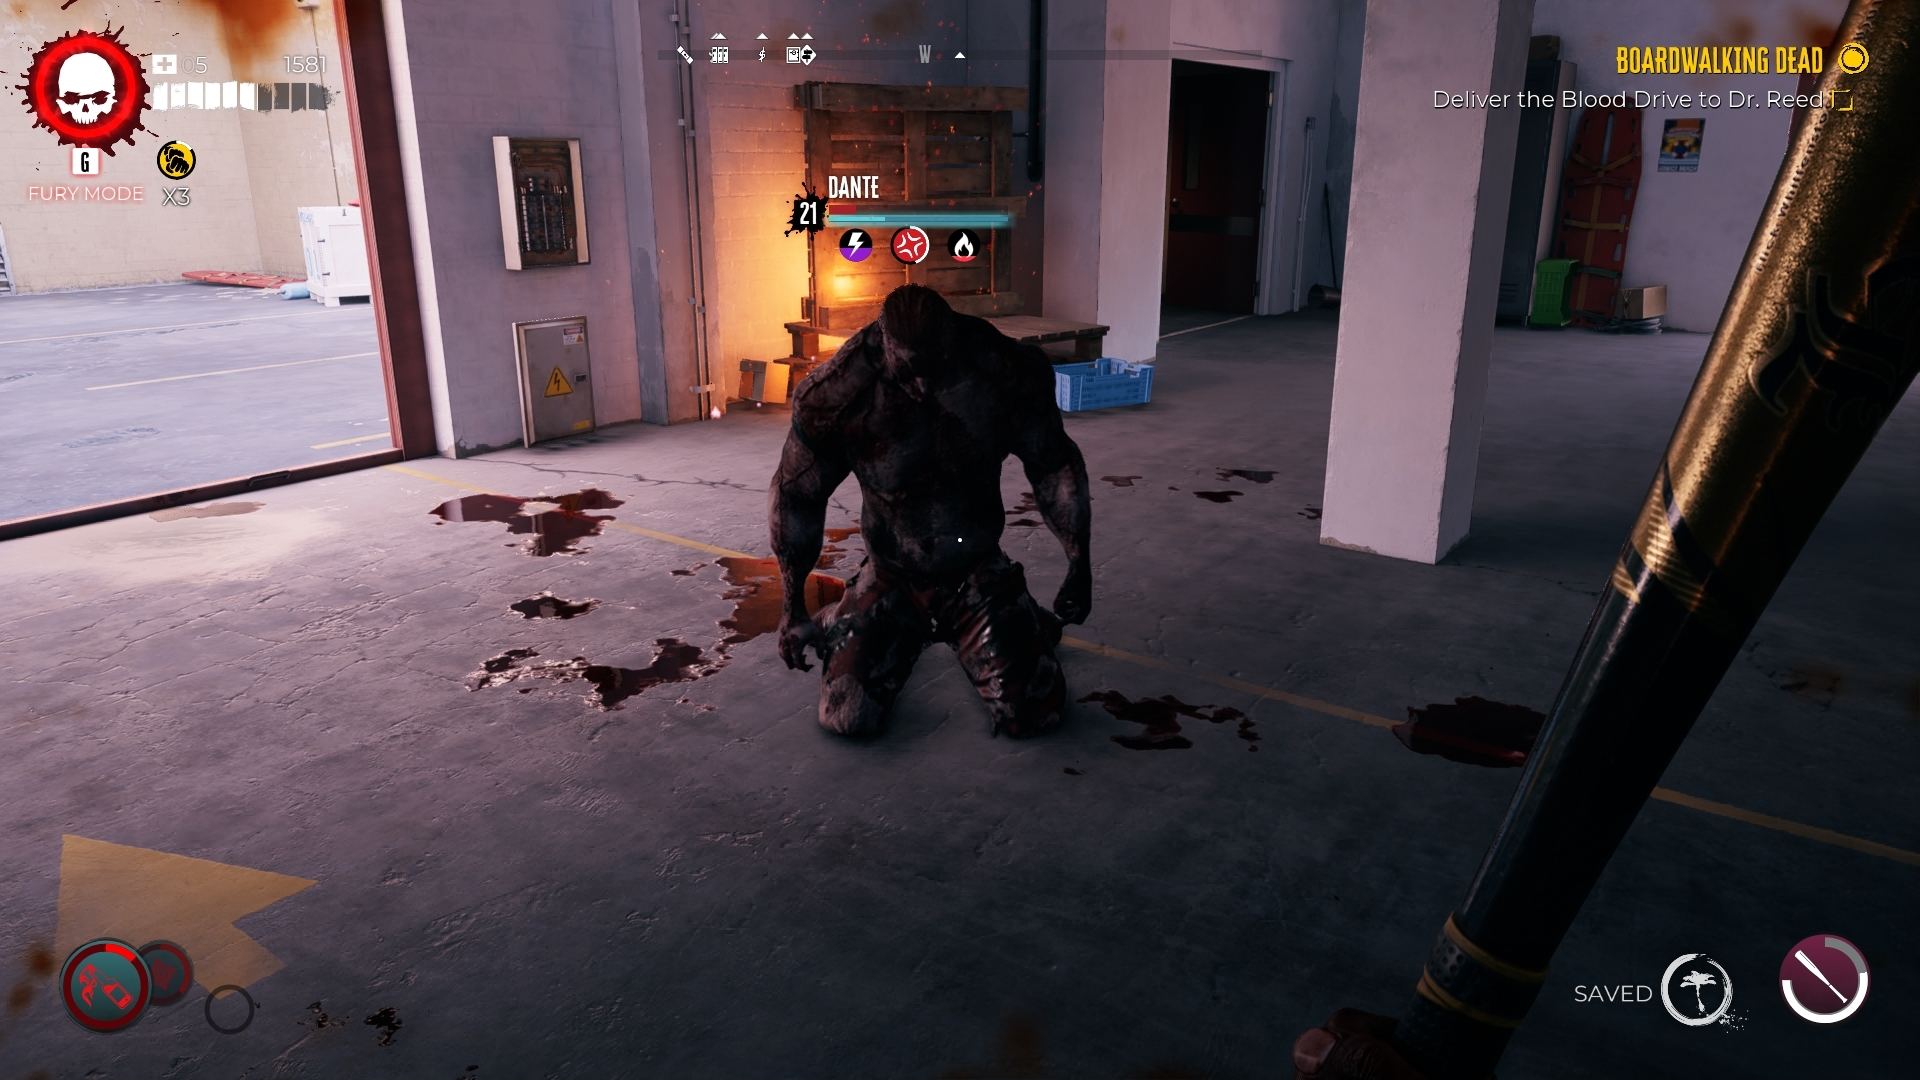 Dead Island 2 Screenshot depicting a bulky zombie kneeling on the gorund inside a building during bright sunlight